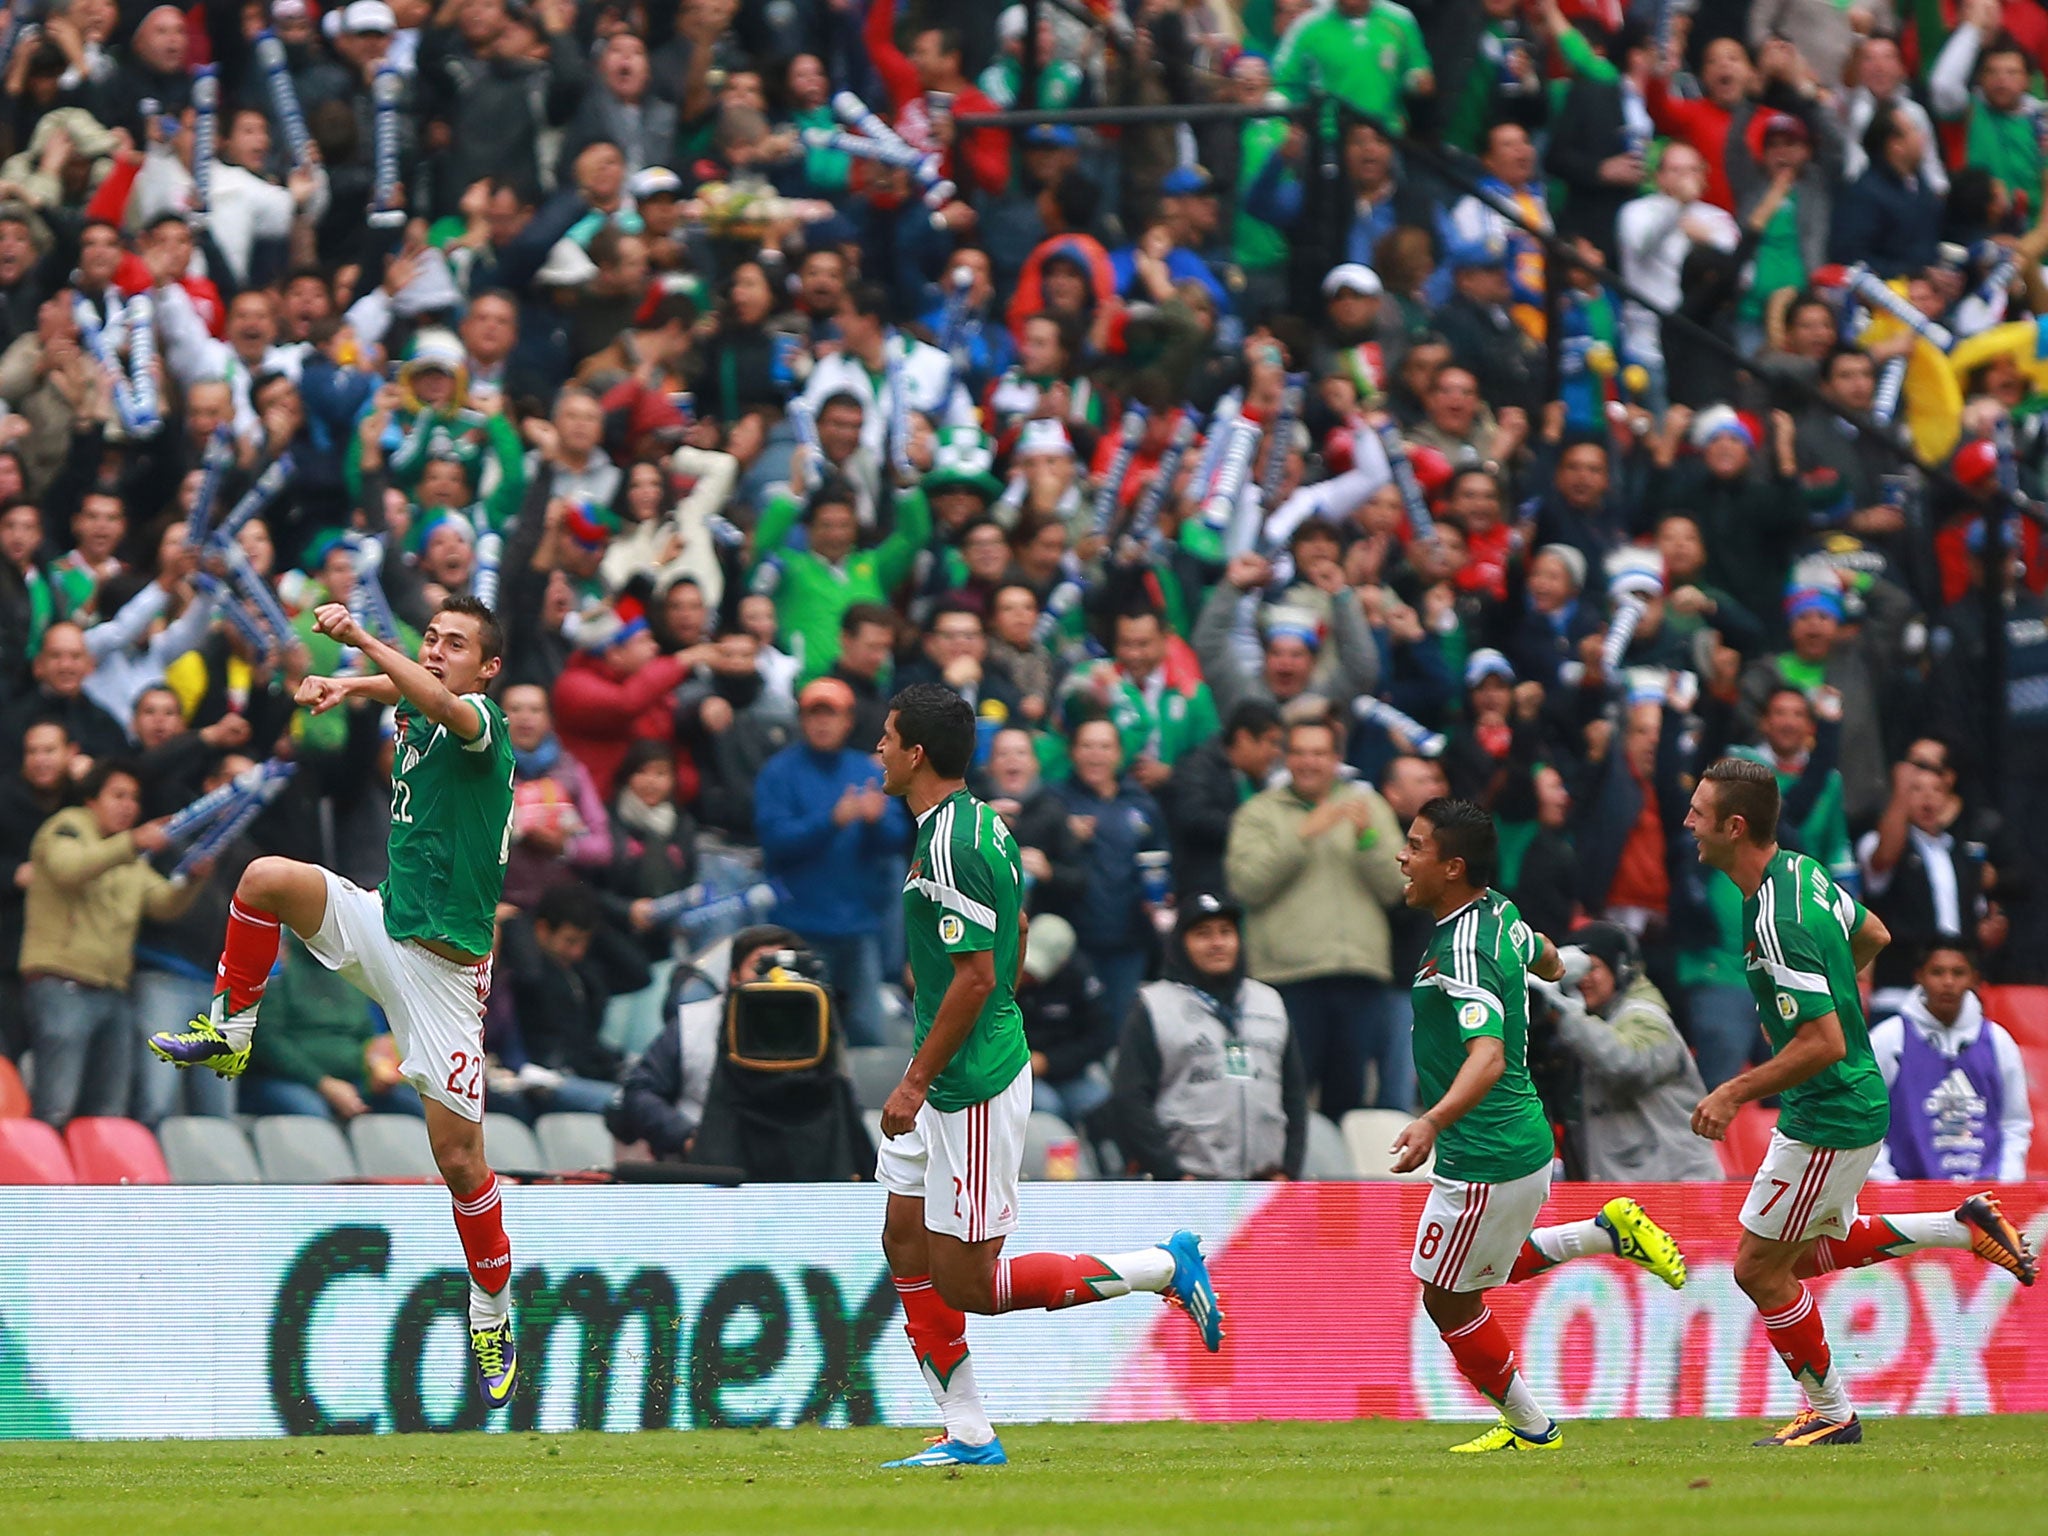 Paul Aguilar celebrates after scoring for Mexico against New Zealand in their 2014 World Cup play-off